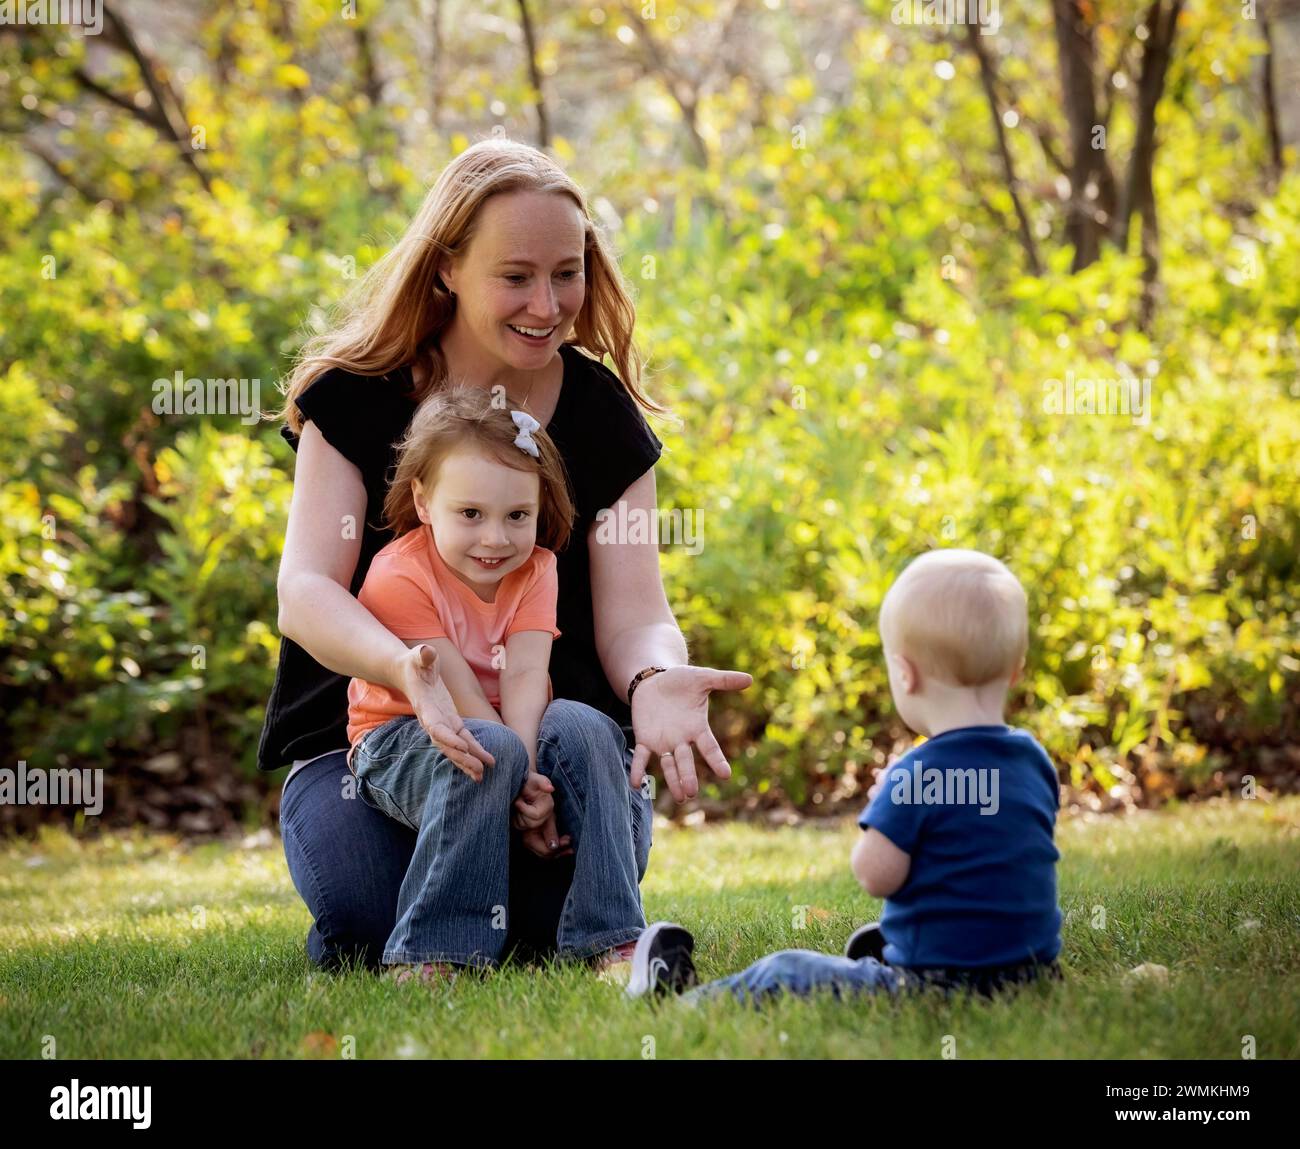 Mother throwing a ball with her young son who has Down Syndrome, and her preschooler daughter, in a city park during a warm fall afternoon Stock Photo